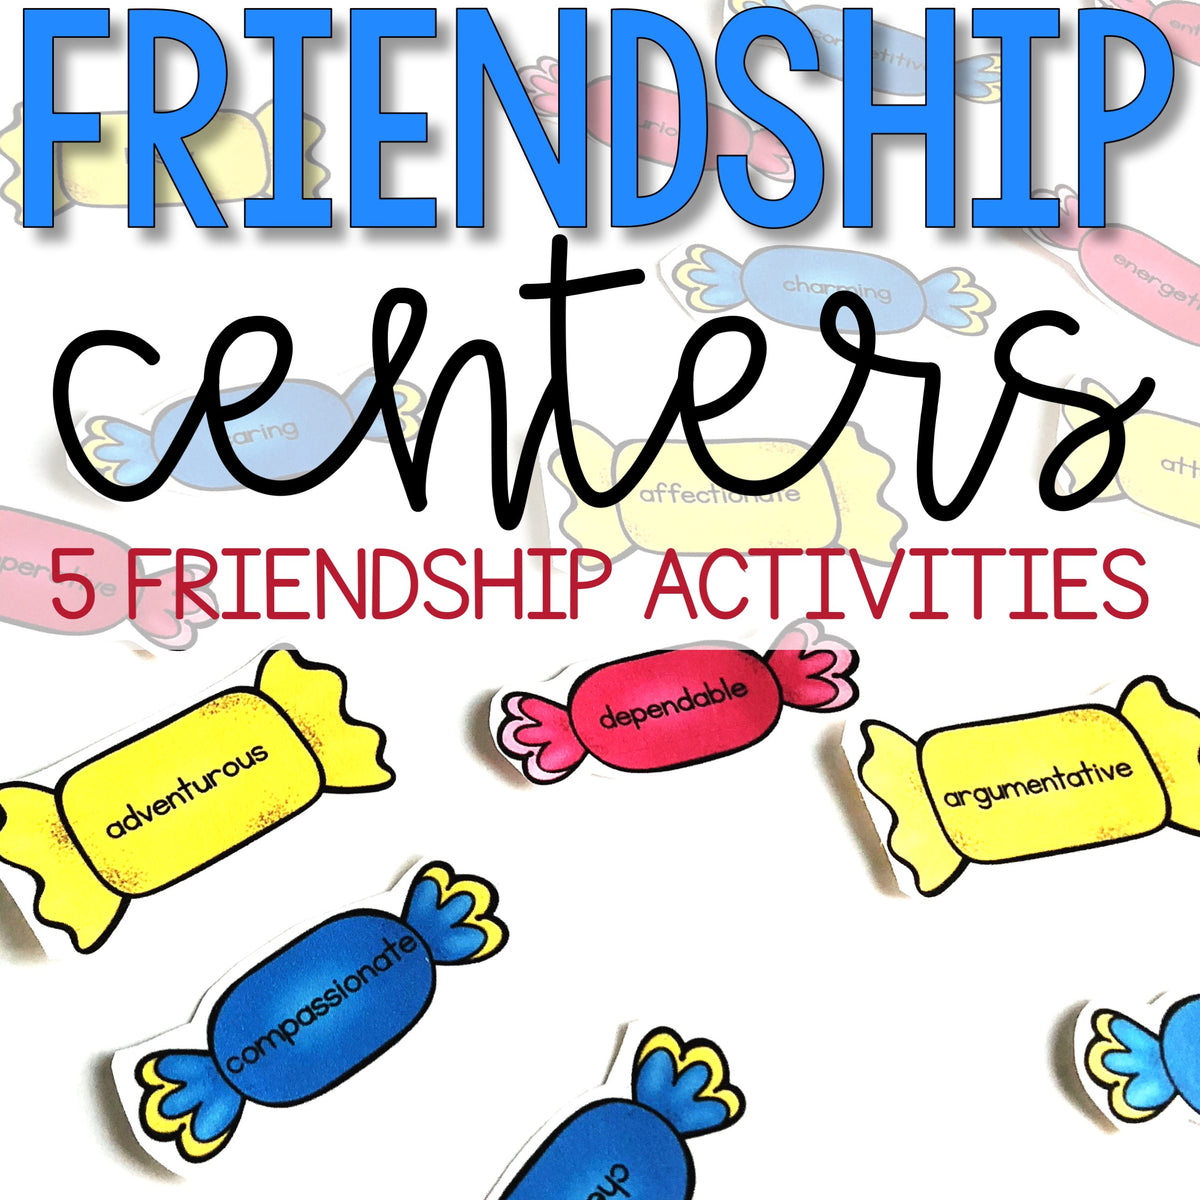 Friendship Traits: Making and Keeping Friends Activity - Centervention®